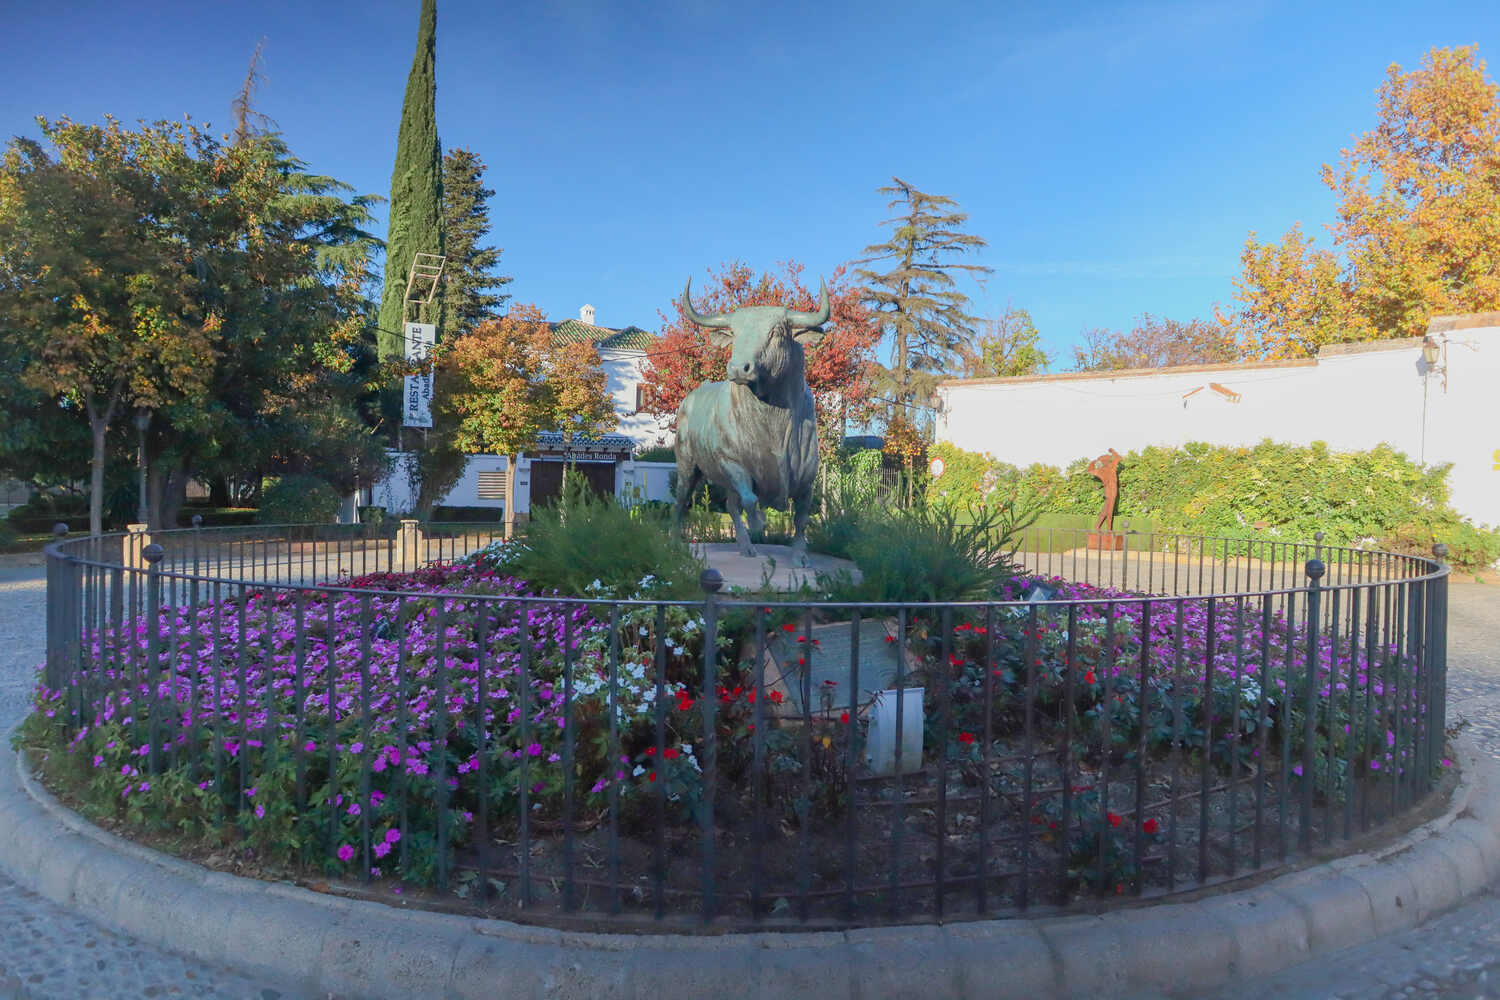 A vibrant flower garden with a central statue of a bull, surrounded by trees and a clear sky above.